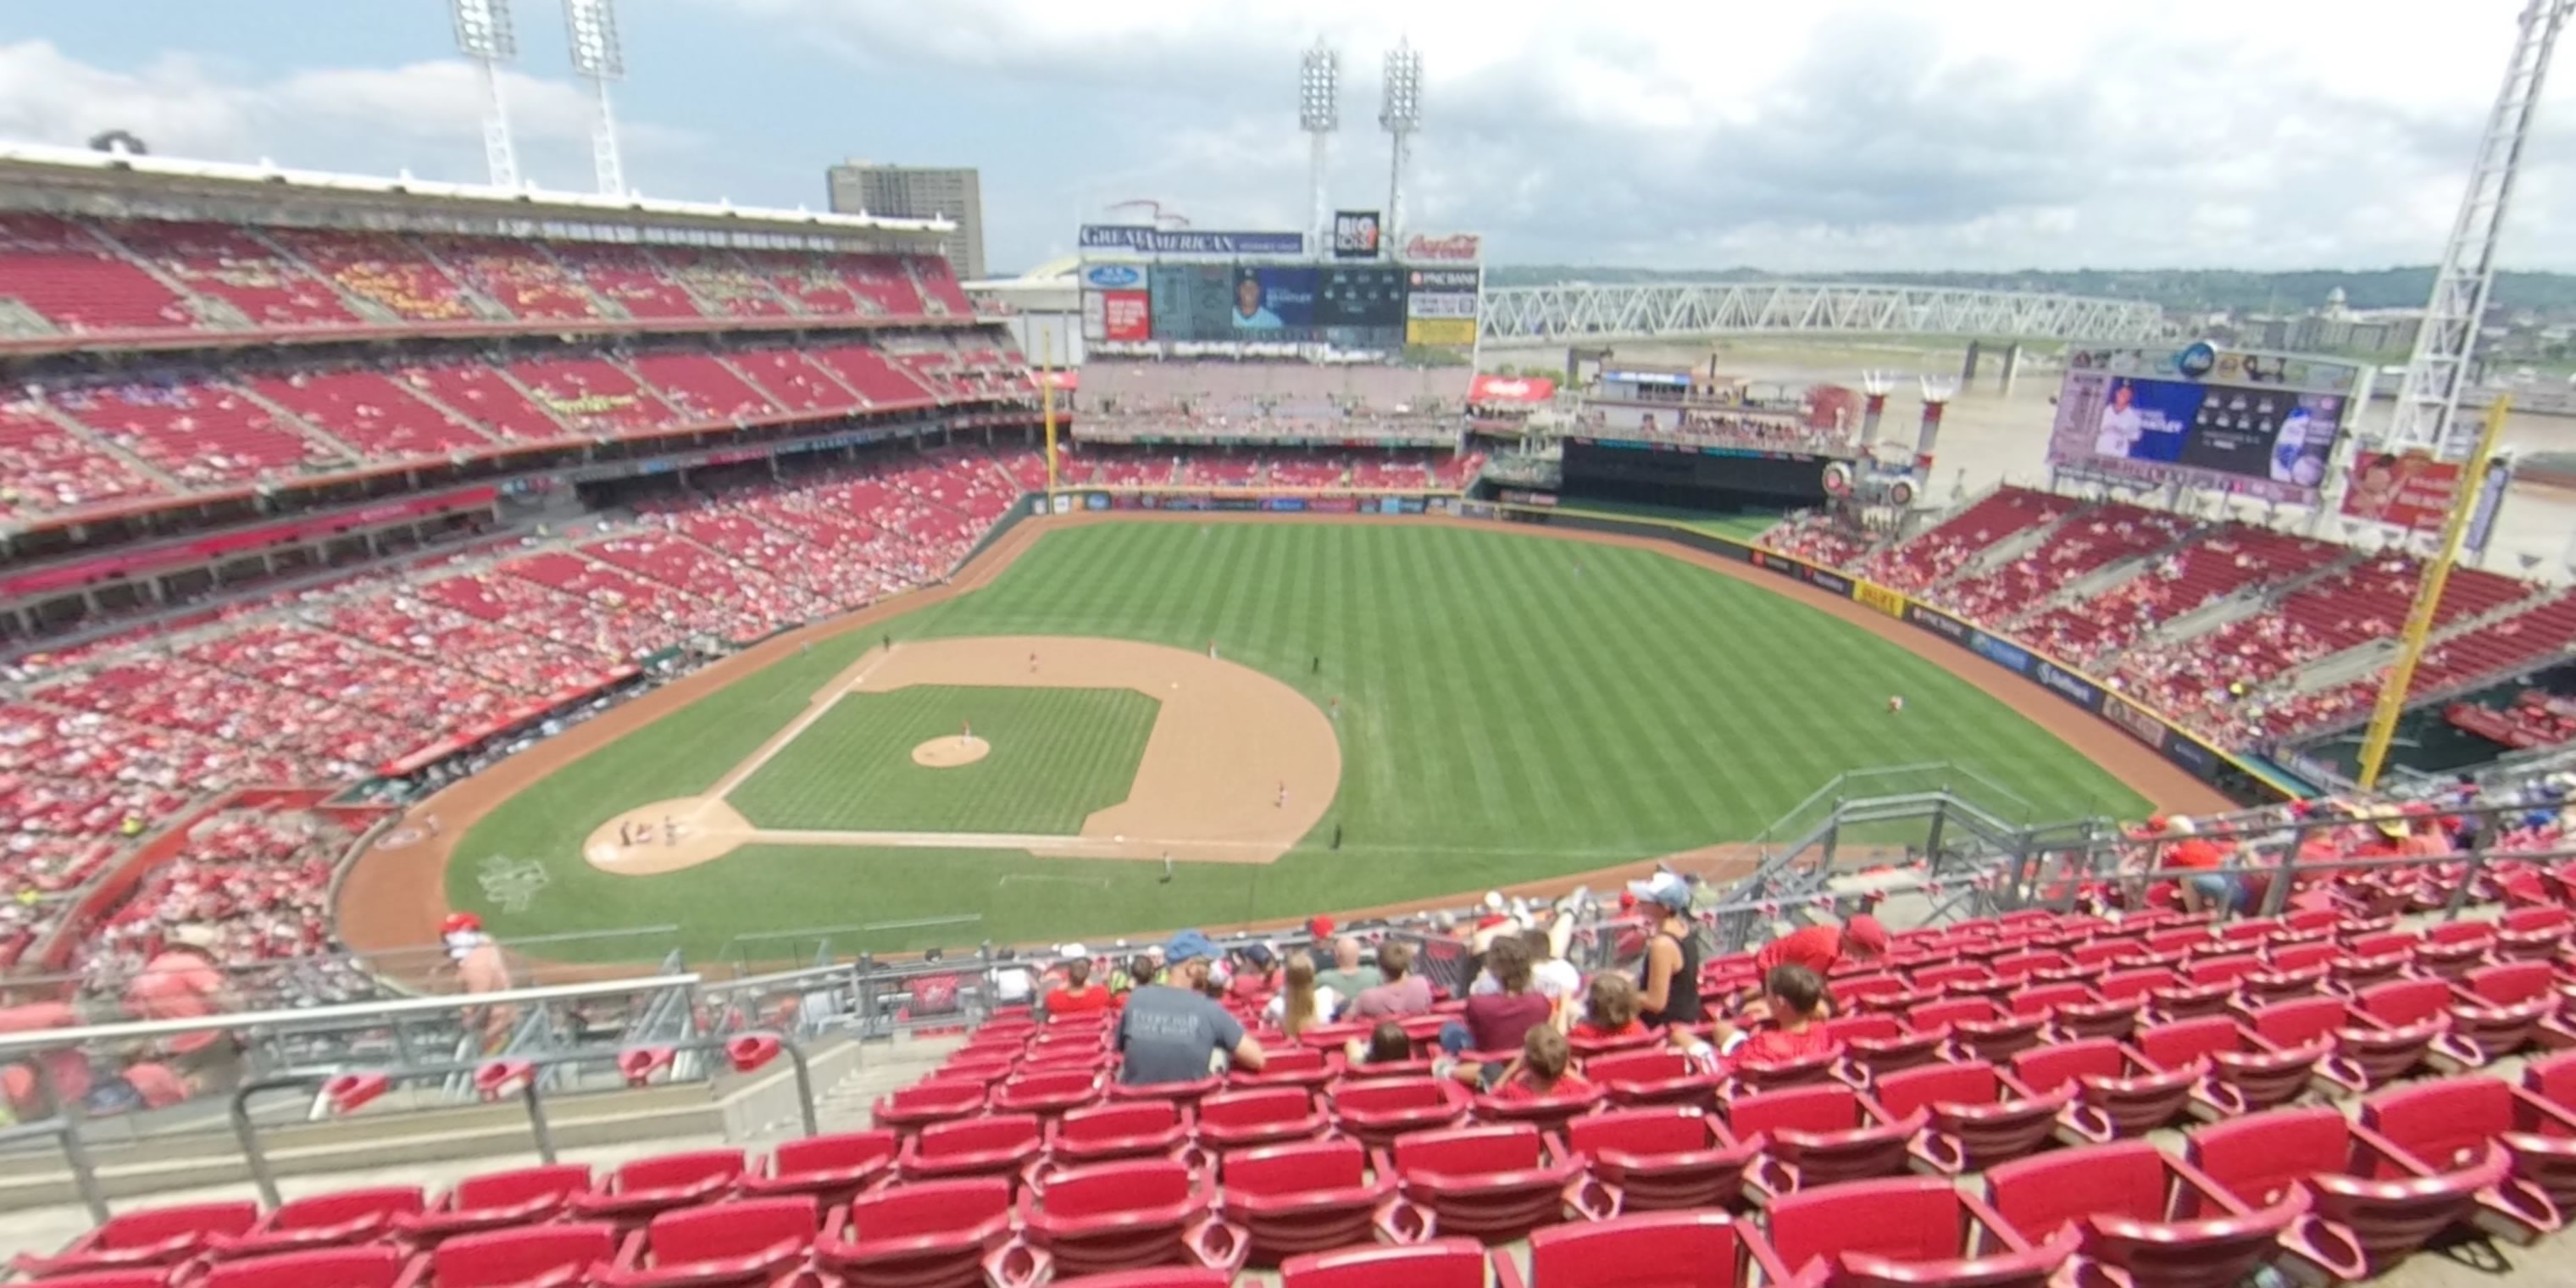 Section 531 at Great American Ball Park 